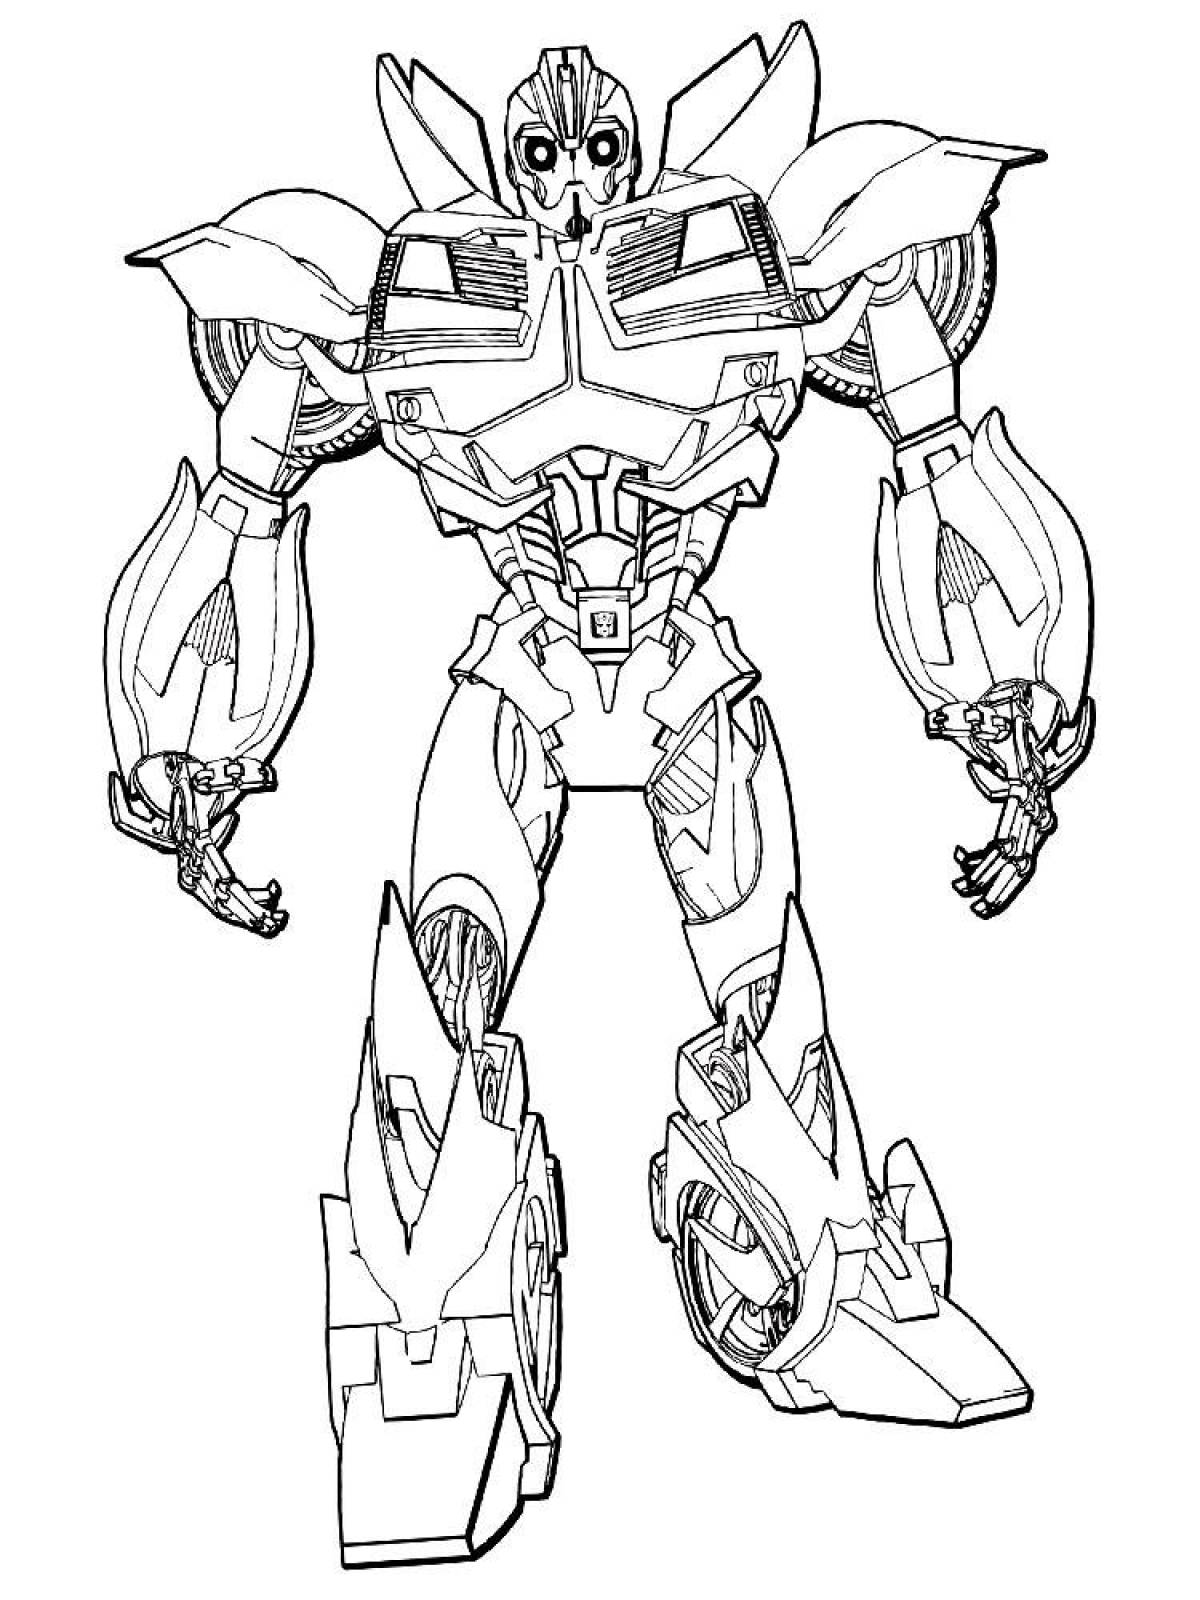 Coloring freaky transformers